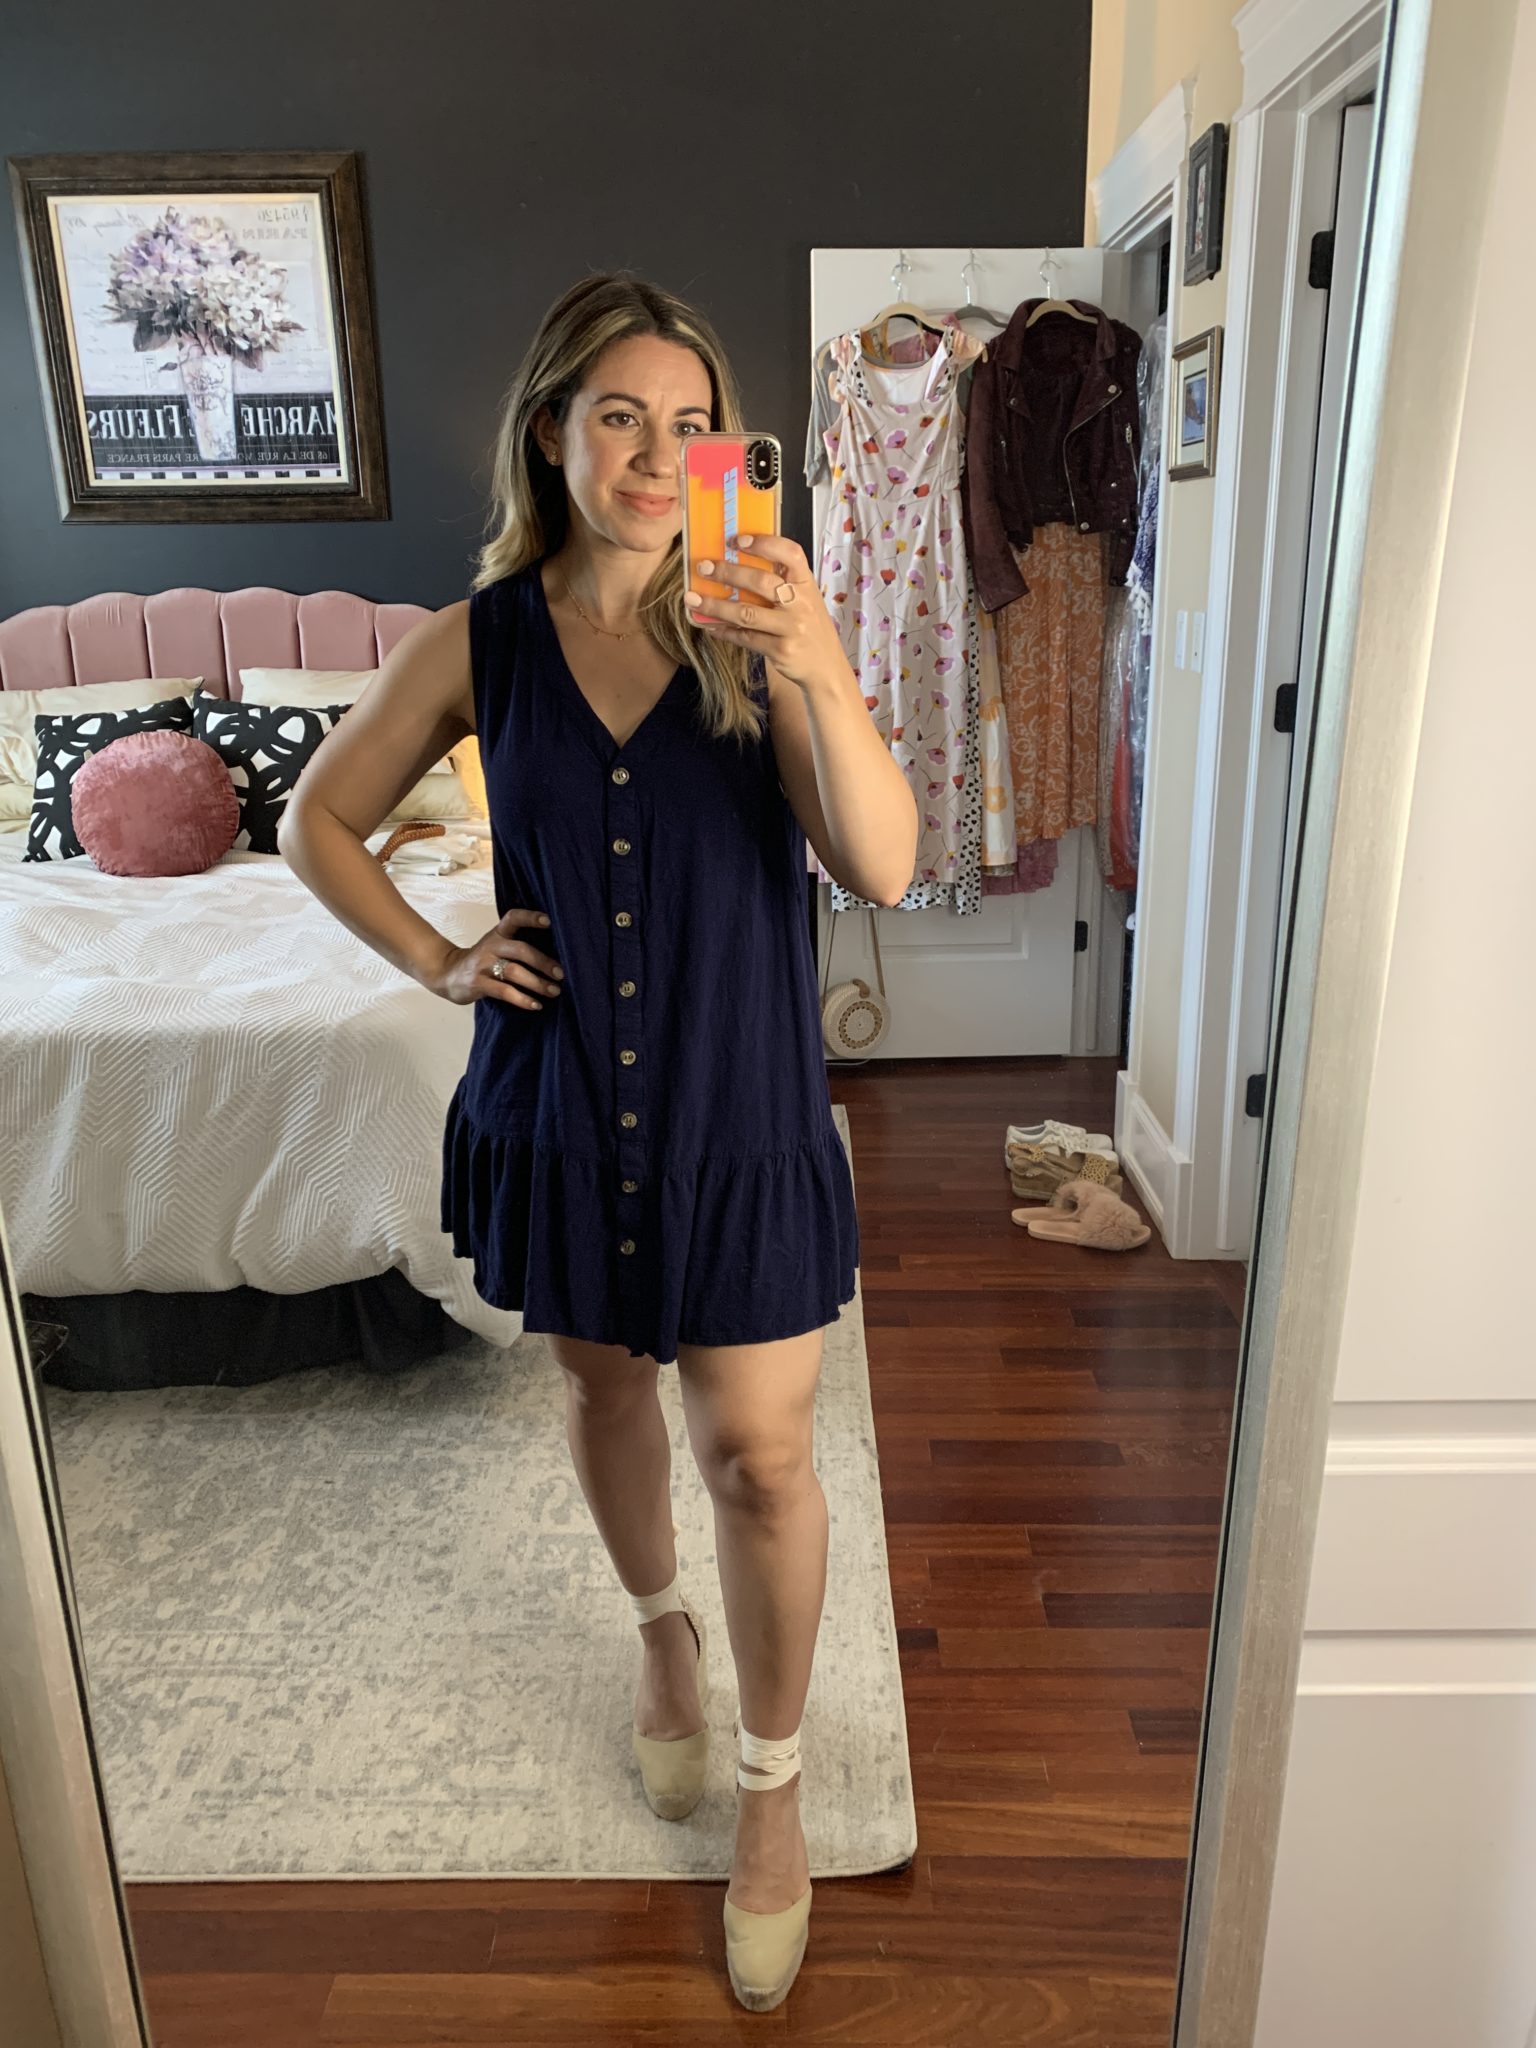 Sleeveless Dress by popular Chicago fashion blog, Glass of Glam: image of a woman standing in her bedroom and wearing a Amazon Imysty Womens Polka Dot V Neck Button Down Ruffles Loose Mini Short T-Shirt Dress and pair of ShopBop Castaner Carina Wedge Espadrilles.